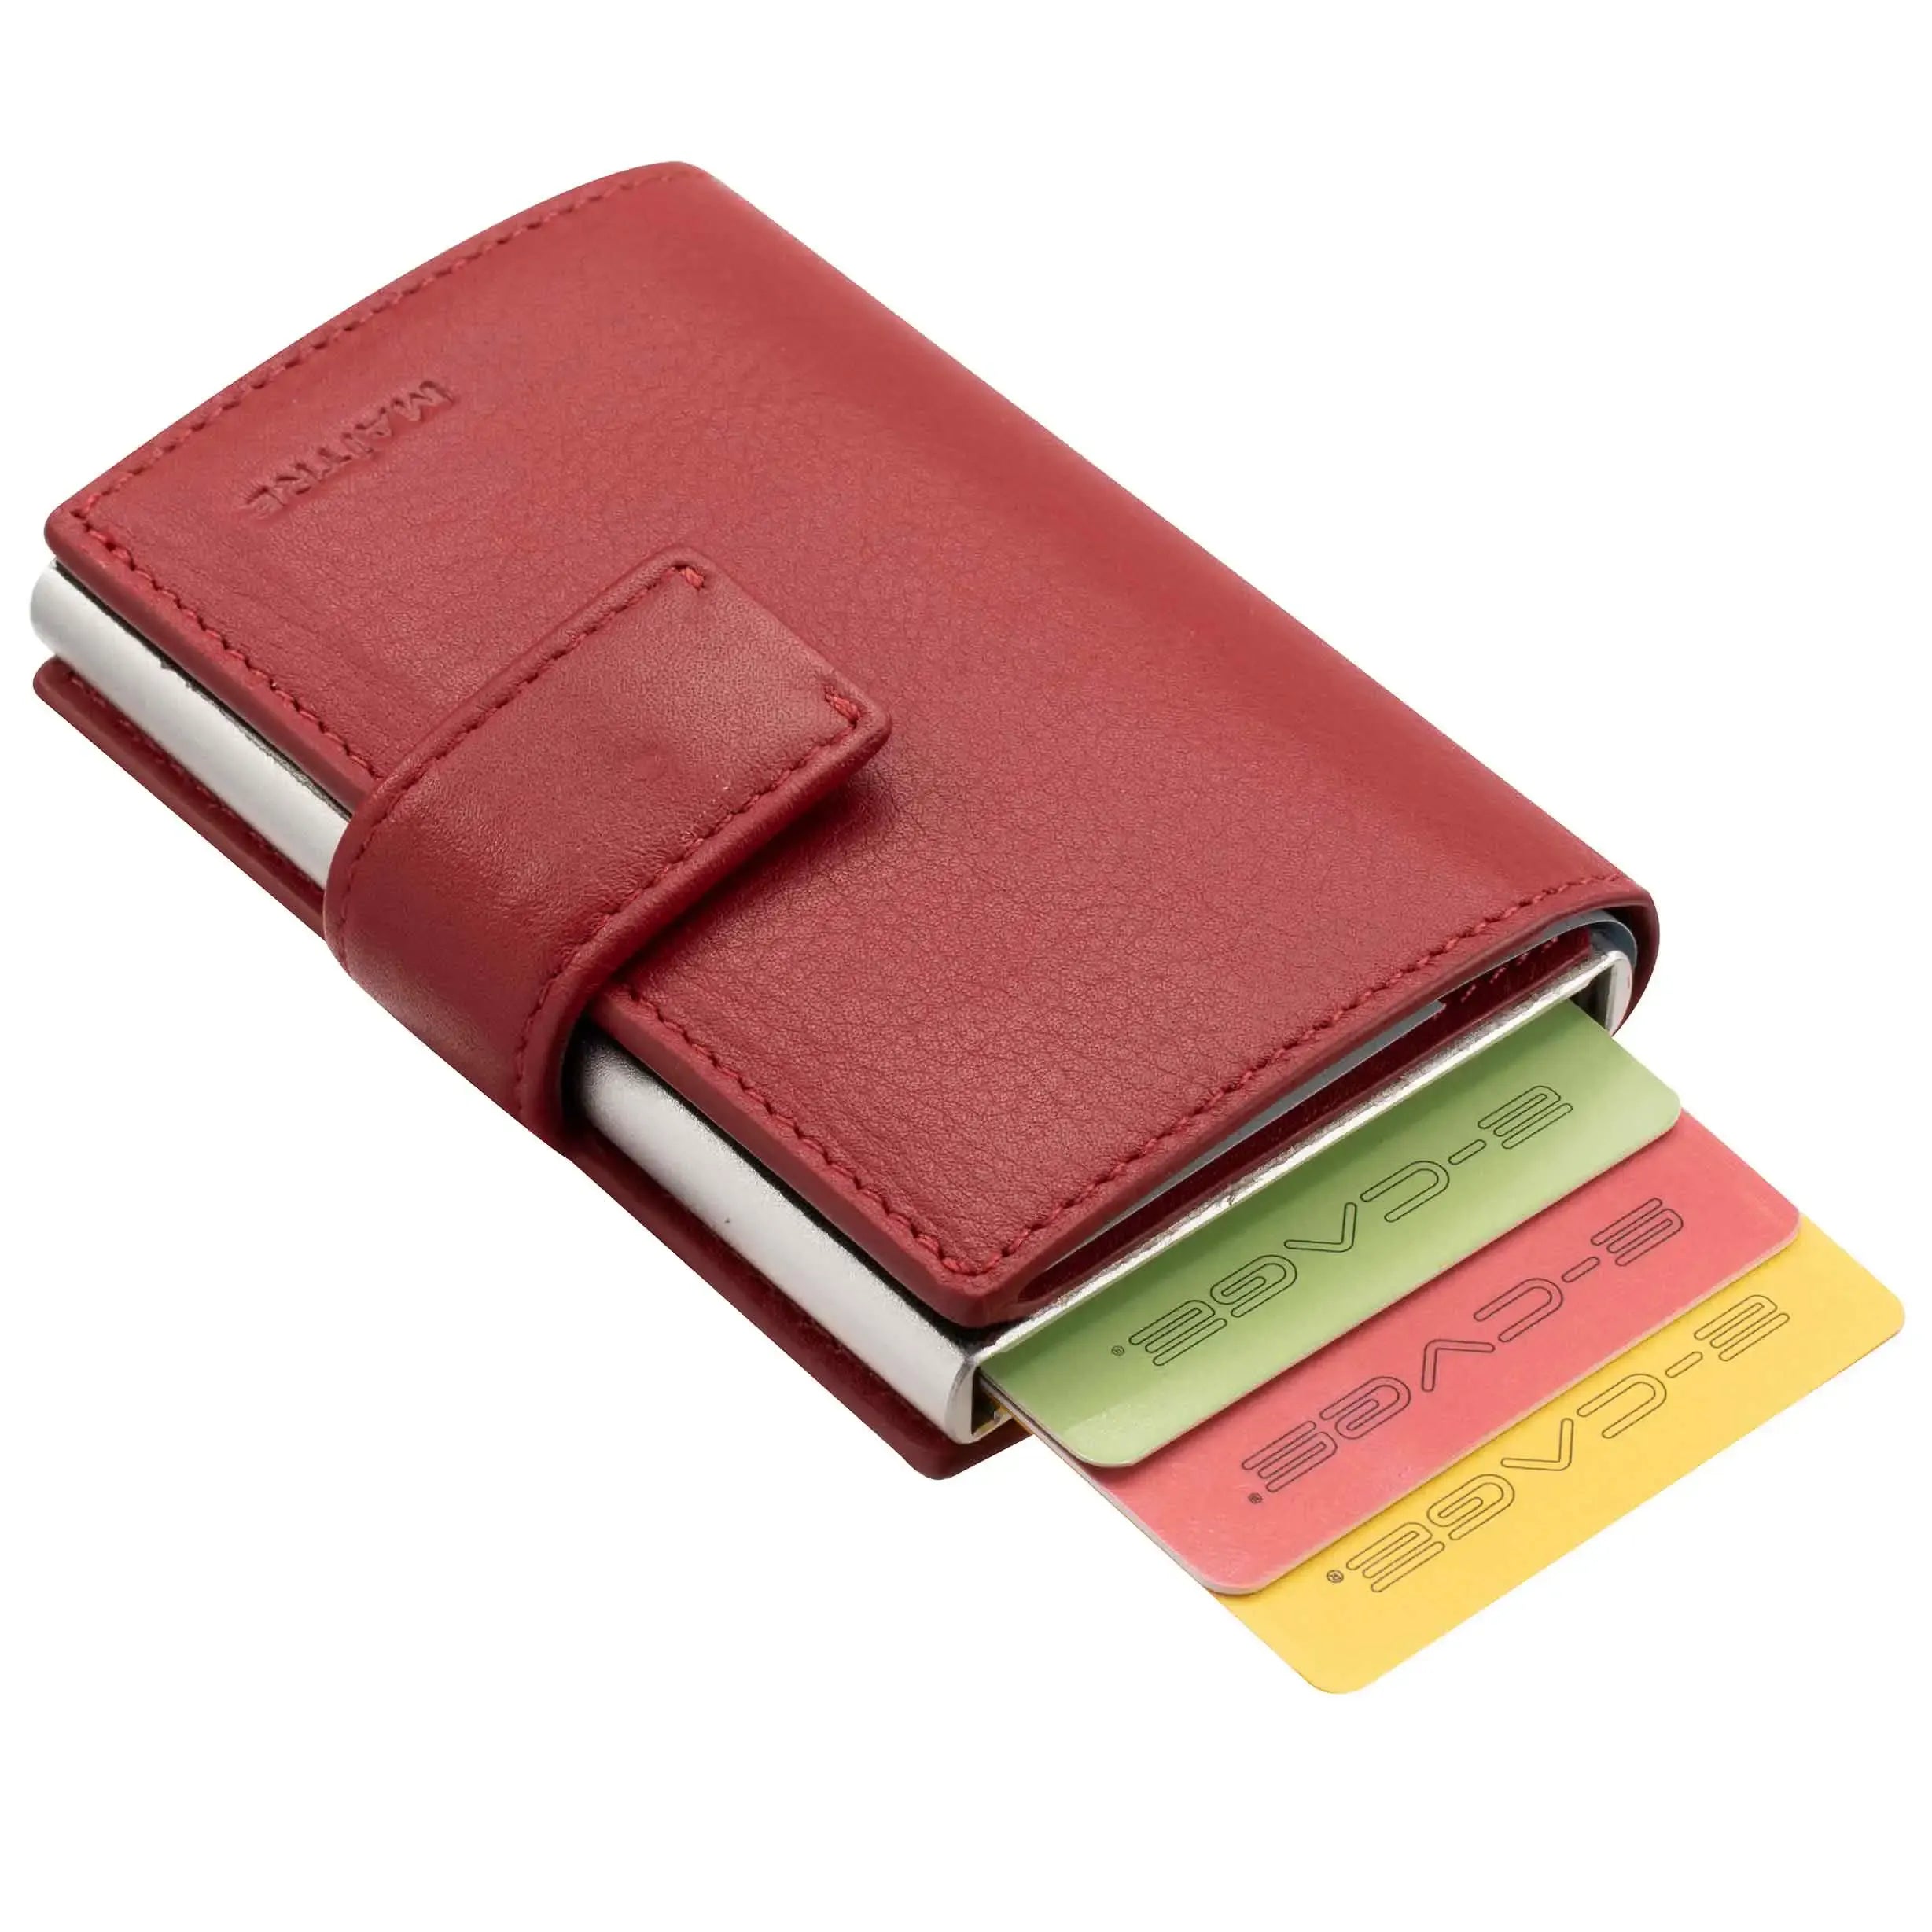 Maitre F3 C-Two E-Cage SV8 wallet 10 cm - Red